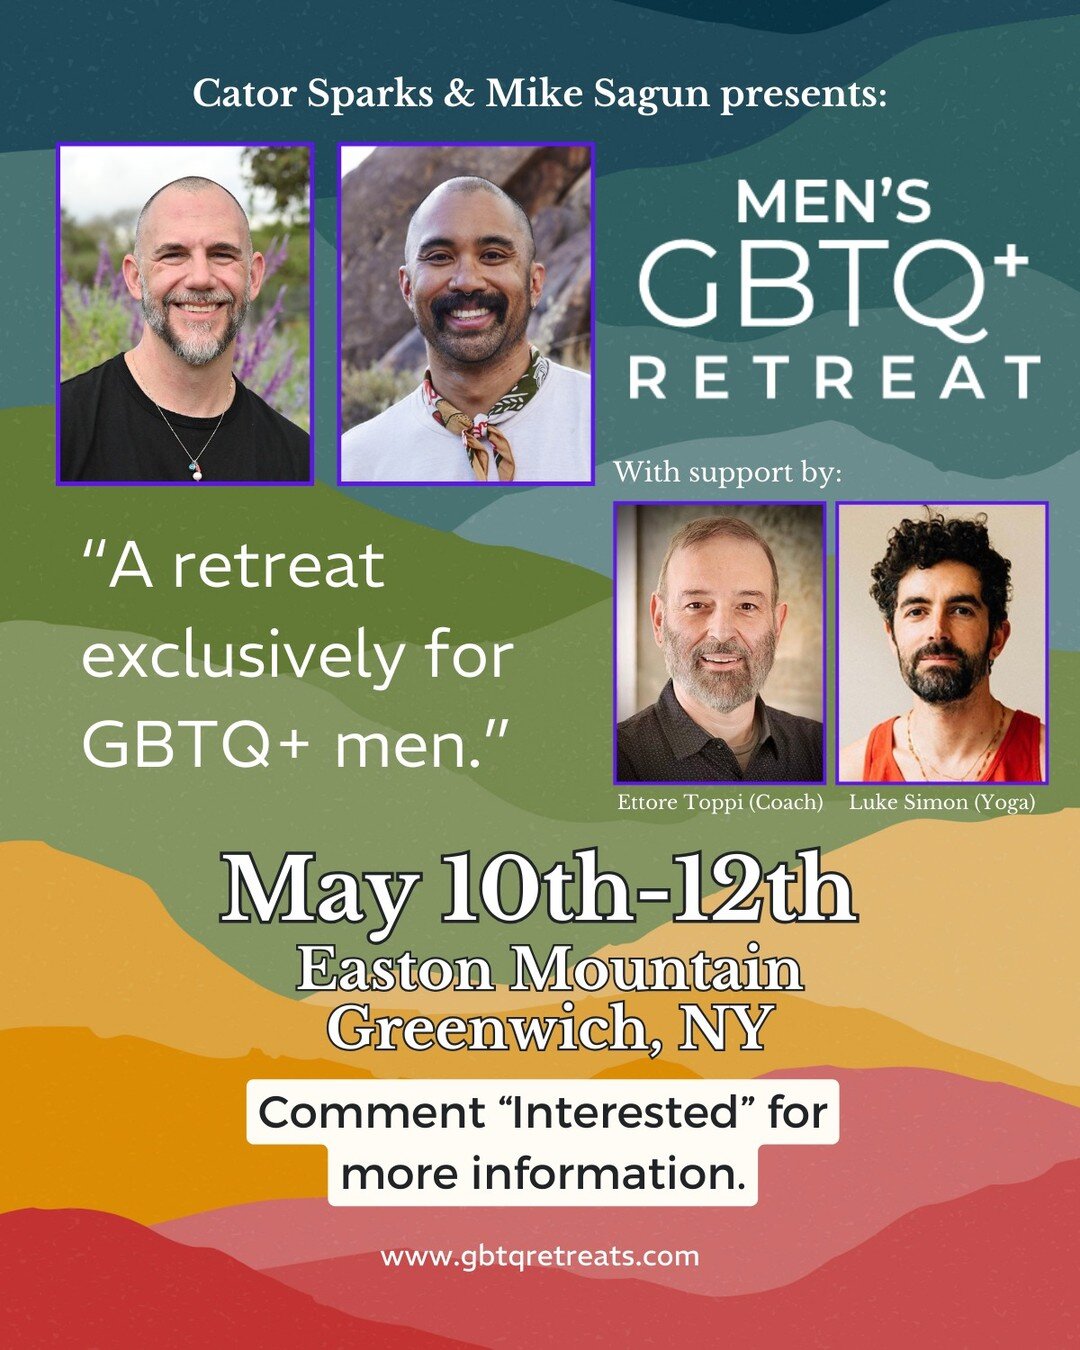 🌈From Emotionally Shutdown to Emotionally Intelligent.🌈

🫂 A retreat exclusively for GBTQ+ men!

Our somatic (body-based) approach to wellness helps GBTQ+ men strengthen their emotional capacity.

&ldquo;The retreats Cator and Mike hold are safe p